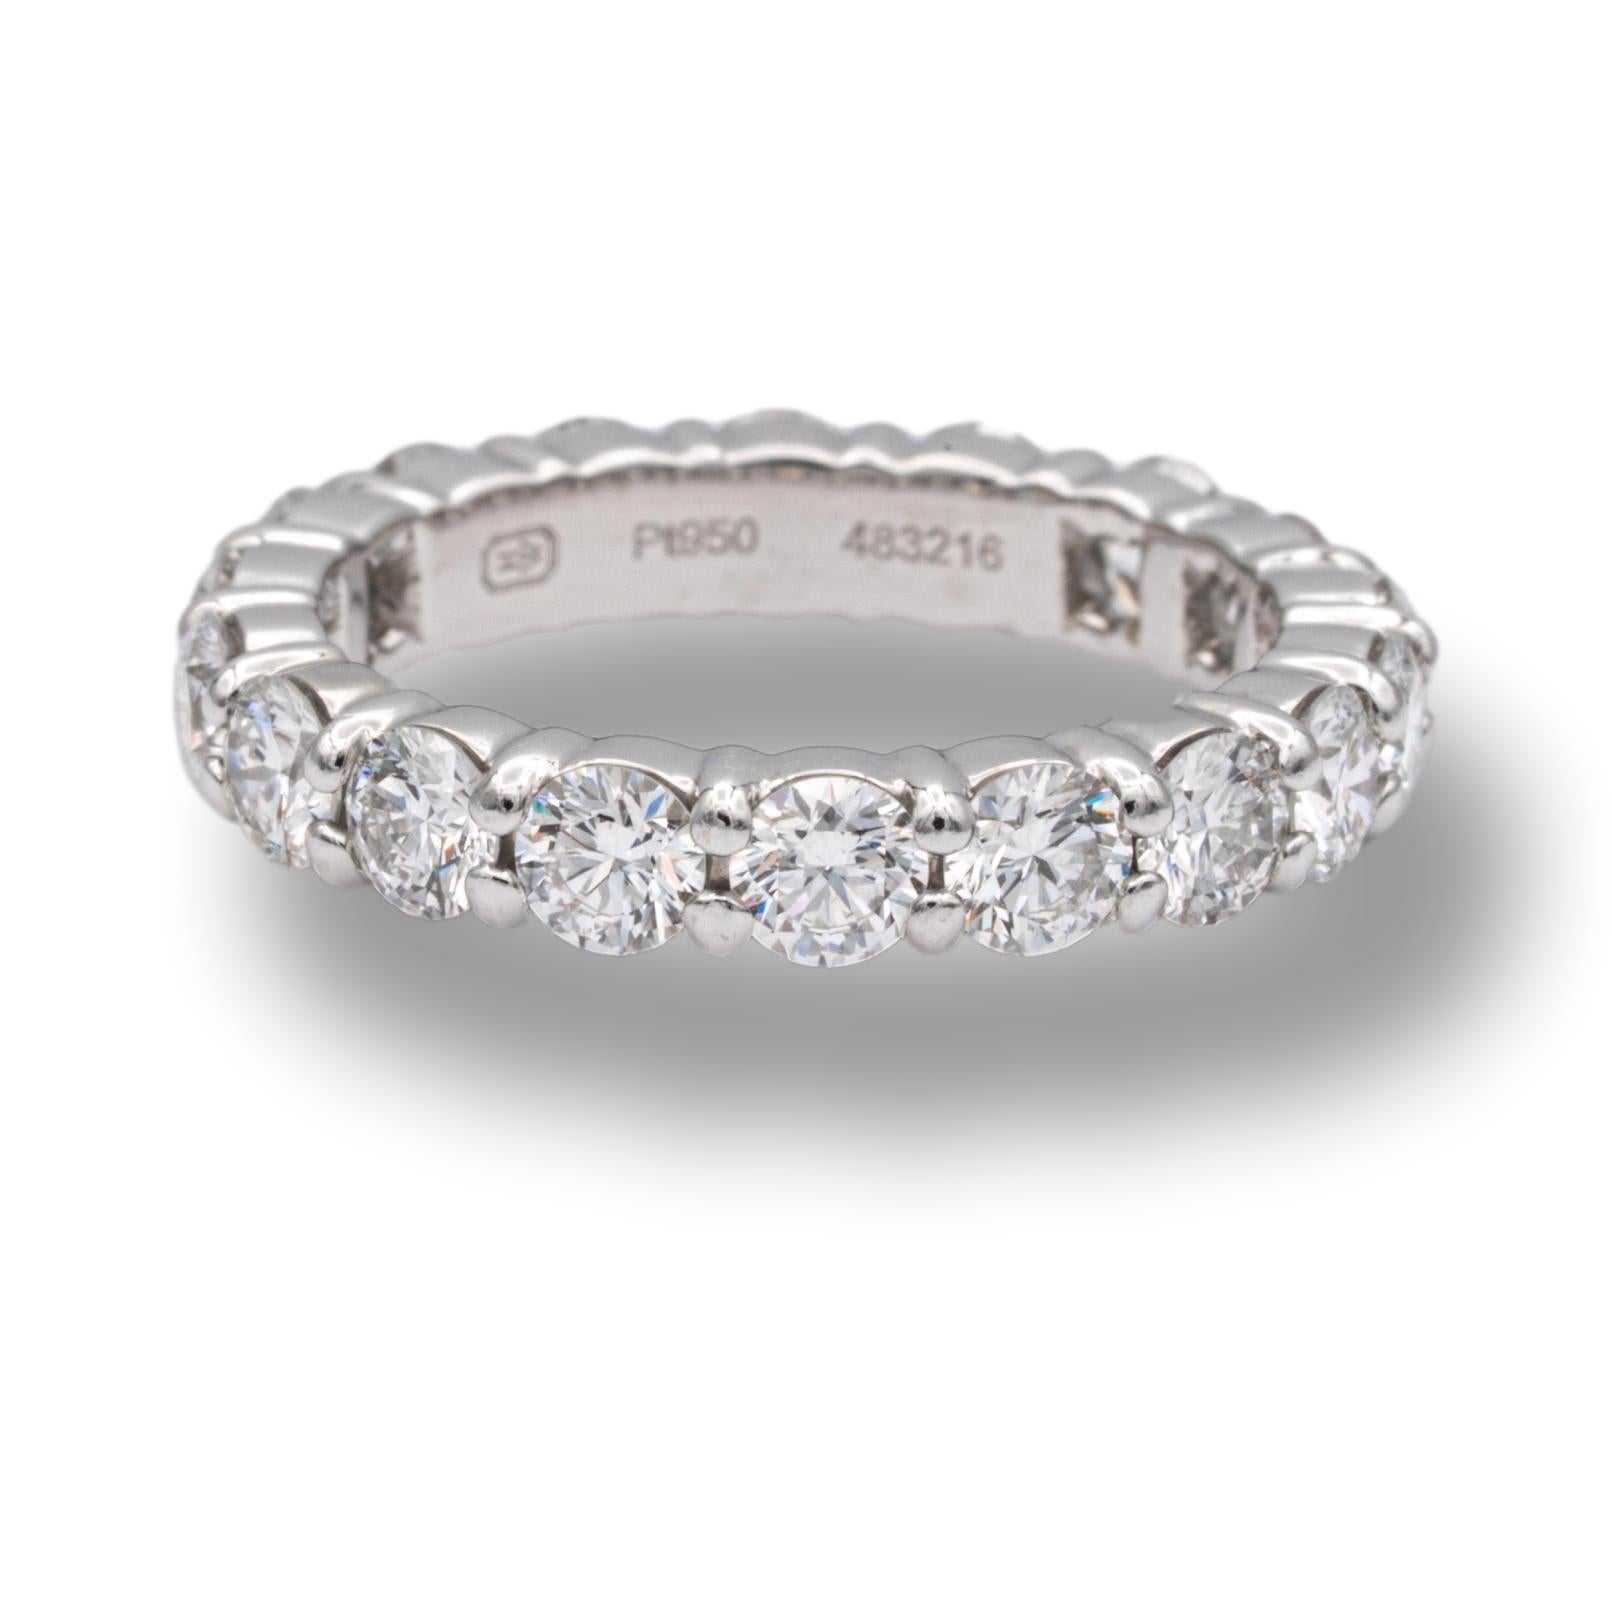 Harry Winston Diamond Eternity Anniversary band ring finely crafted in platinum with 18 round brilliant cut diamonds set in continuous shared prongs ranging D-F in color and VS2 and finer clarity.
Comes in Harry Winston pouch and box. 

Diamonds: